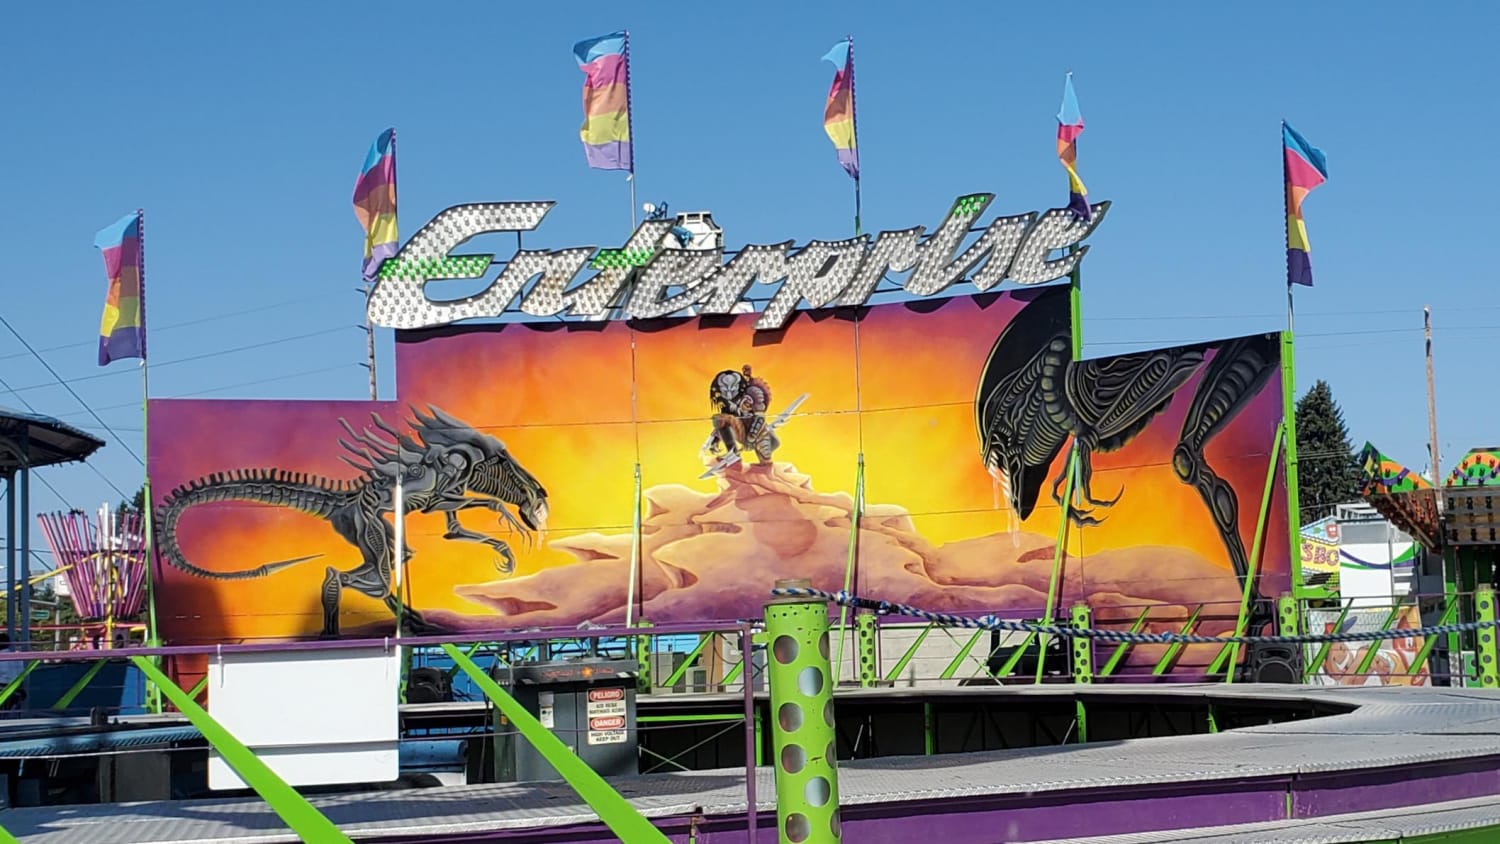 At the local state fair there was a ride called "Enterprise" with a giant mural depicting a scene from my favorite Trek episode. 😆